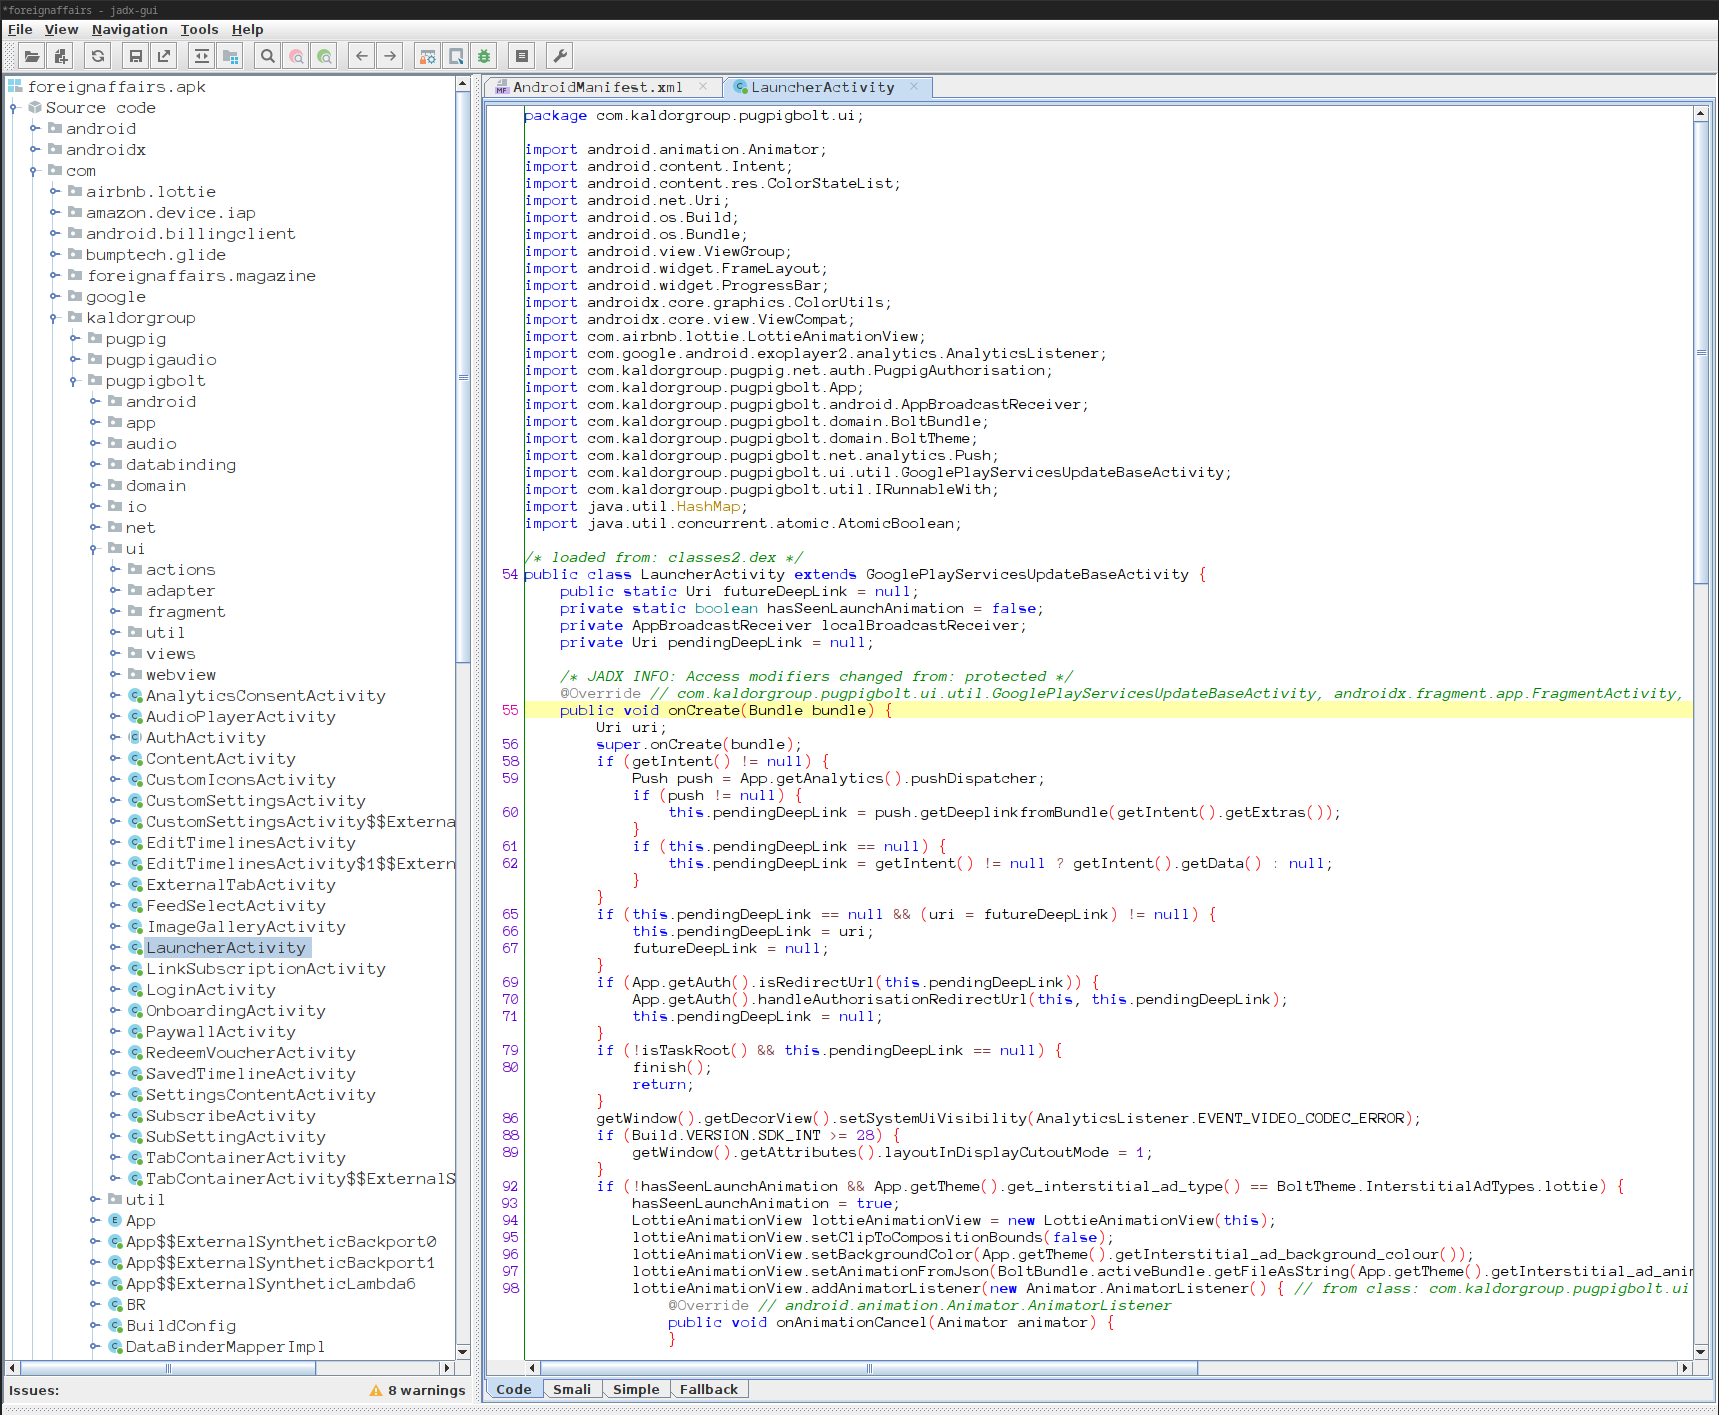 Image of the tool jadx-gui showing source code of the target application